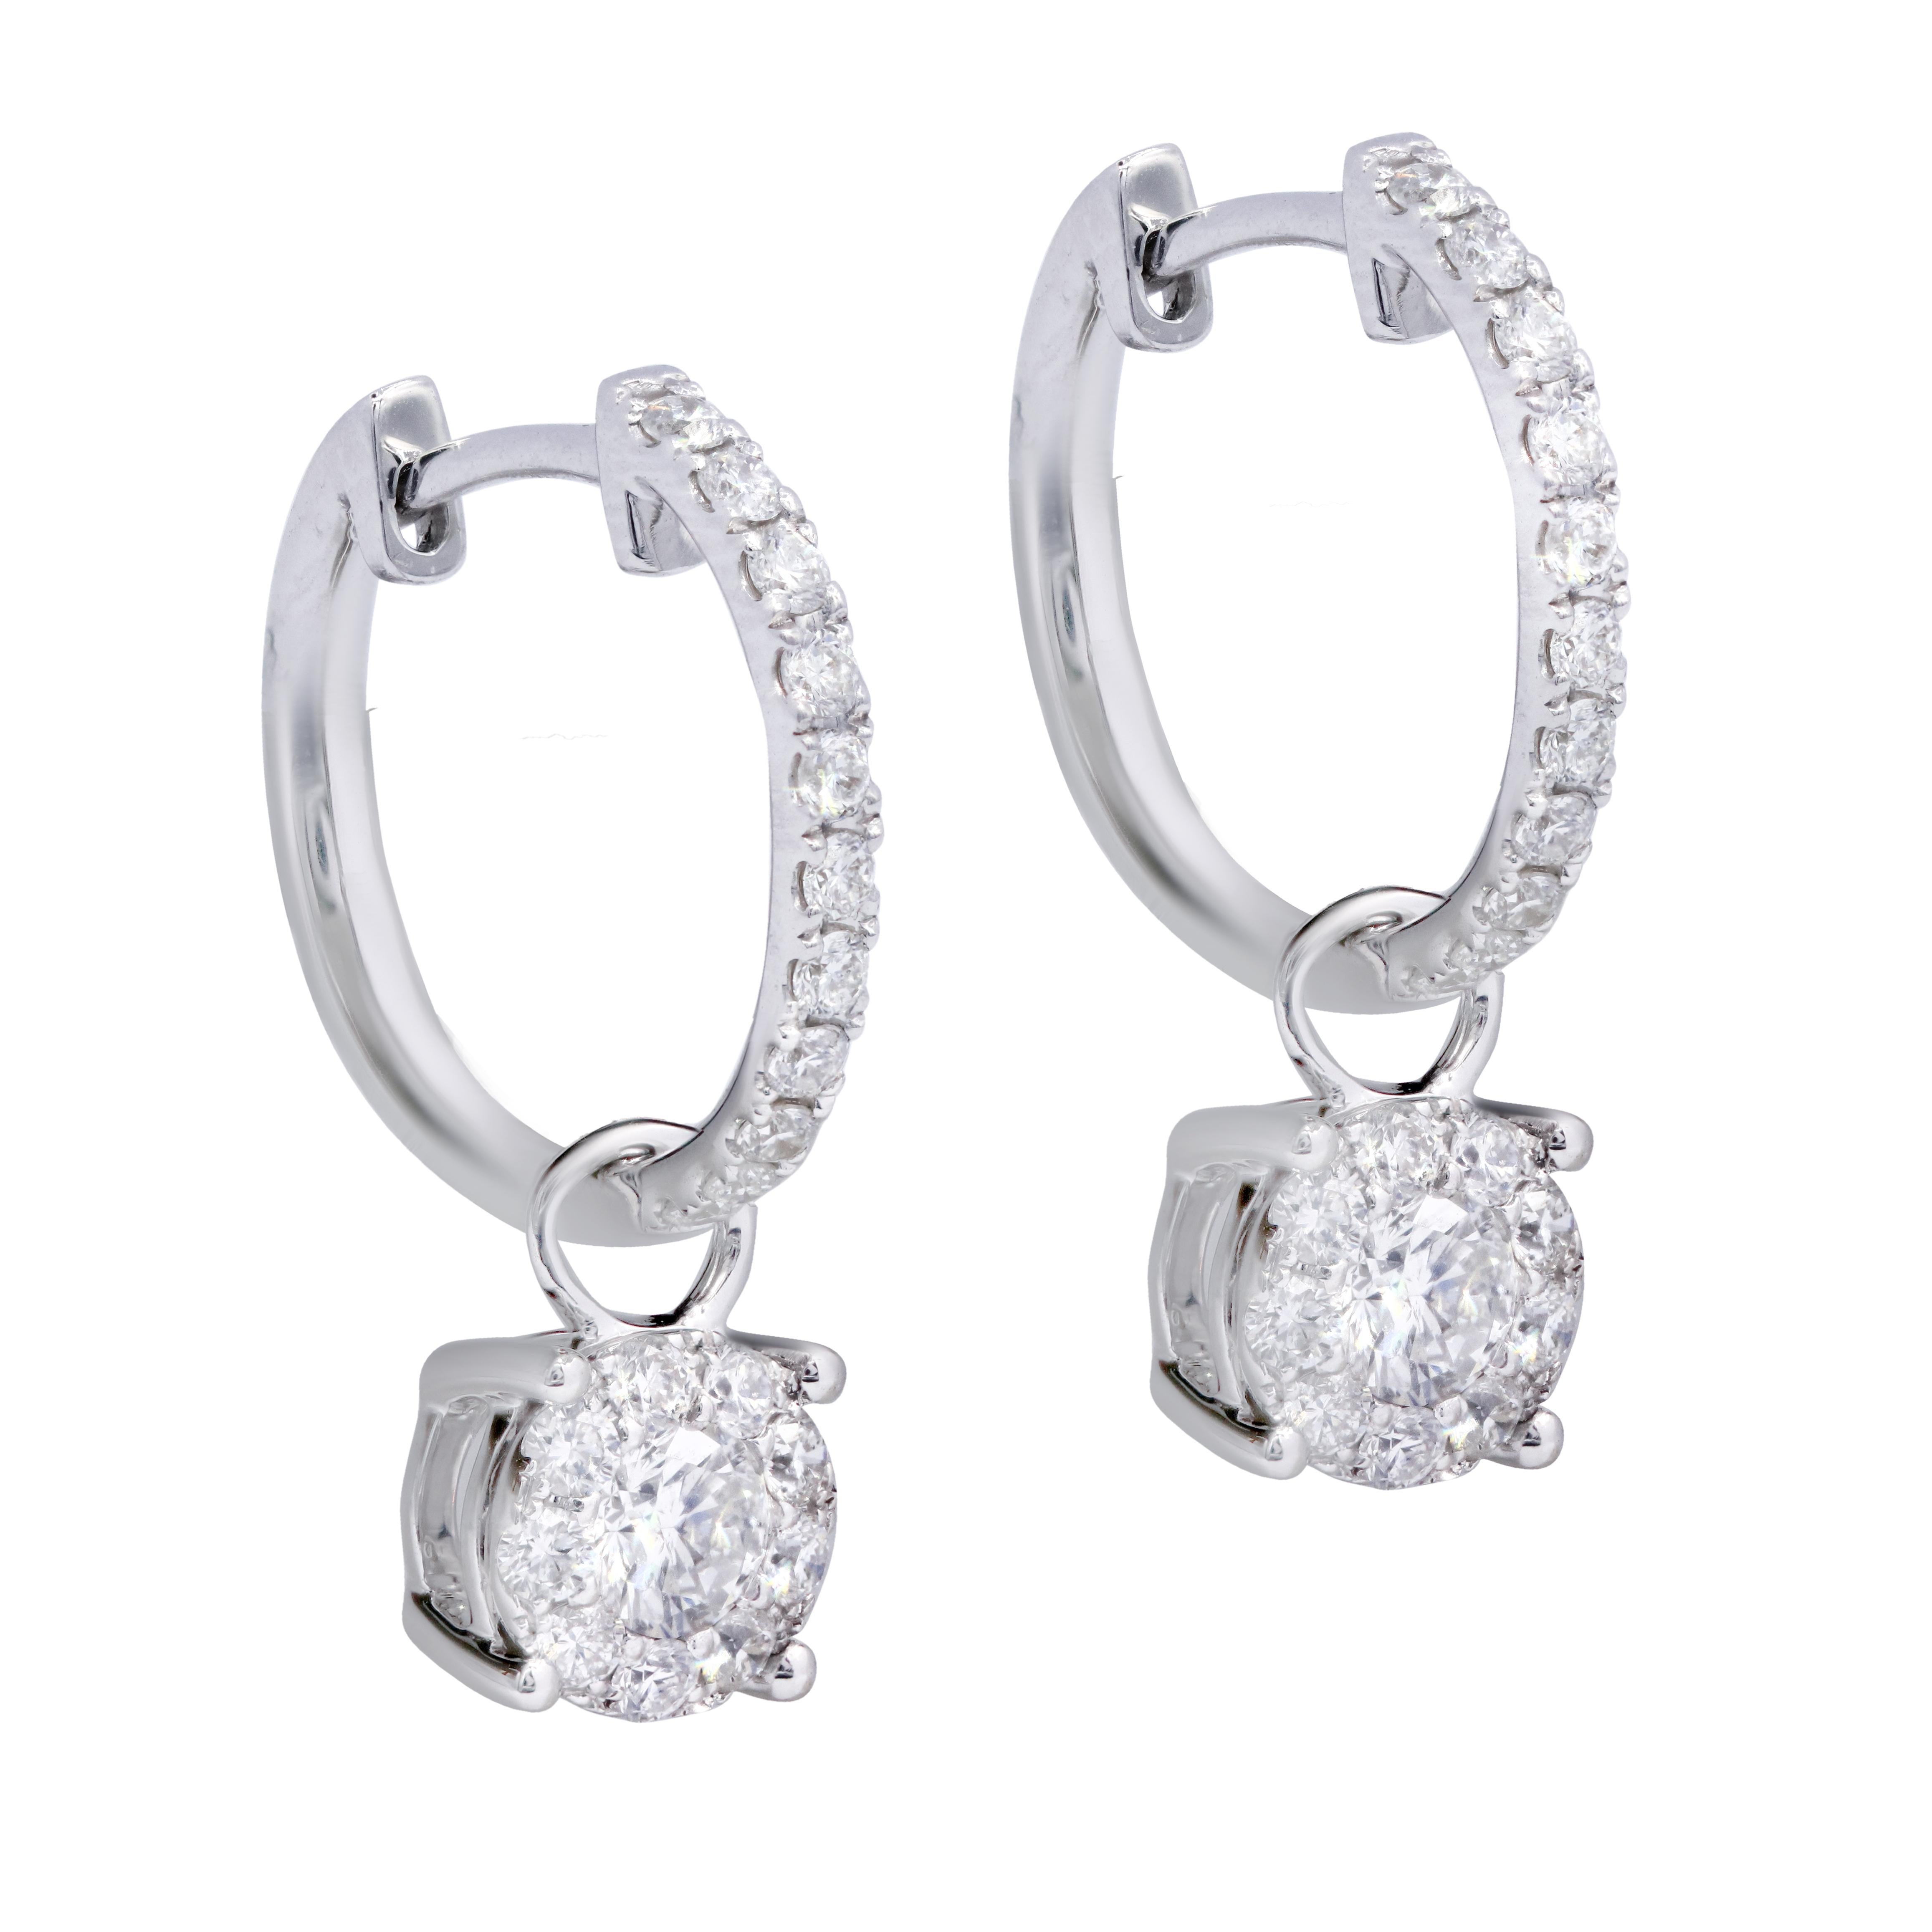 14kt white gold drop earrings featuring 1.00 cts tw of round diamonds GH SI
Diana M. is a leading supplier of top-quality fine jewelry for over 35 years.
Diana M is one-stop shop for all your jewelry shopping, carrying line of diamond rings,